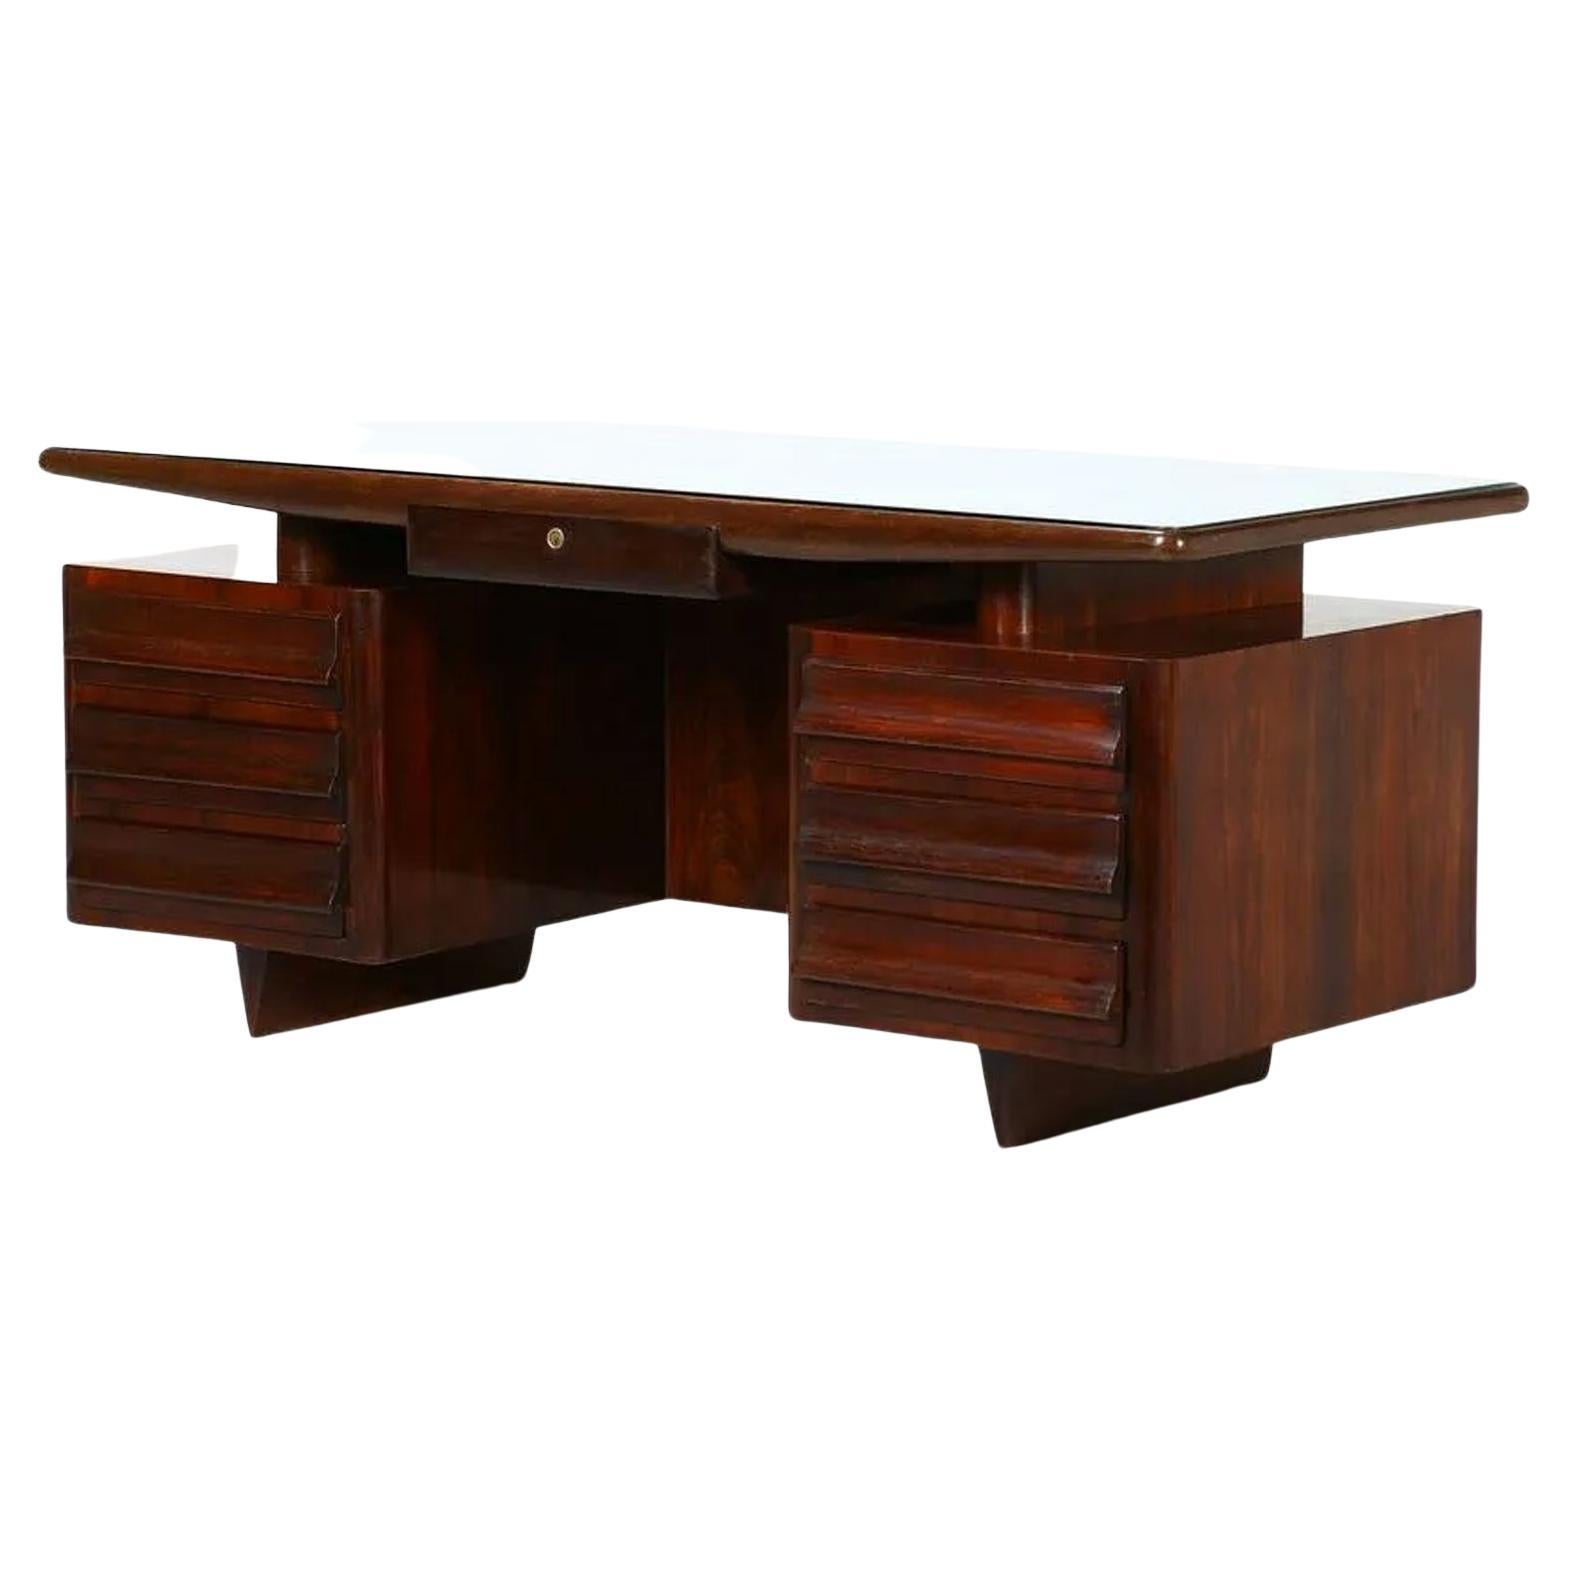 Gio Ponti Attributed "Rosewood Desk"